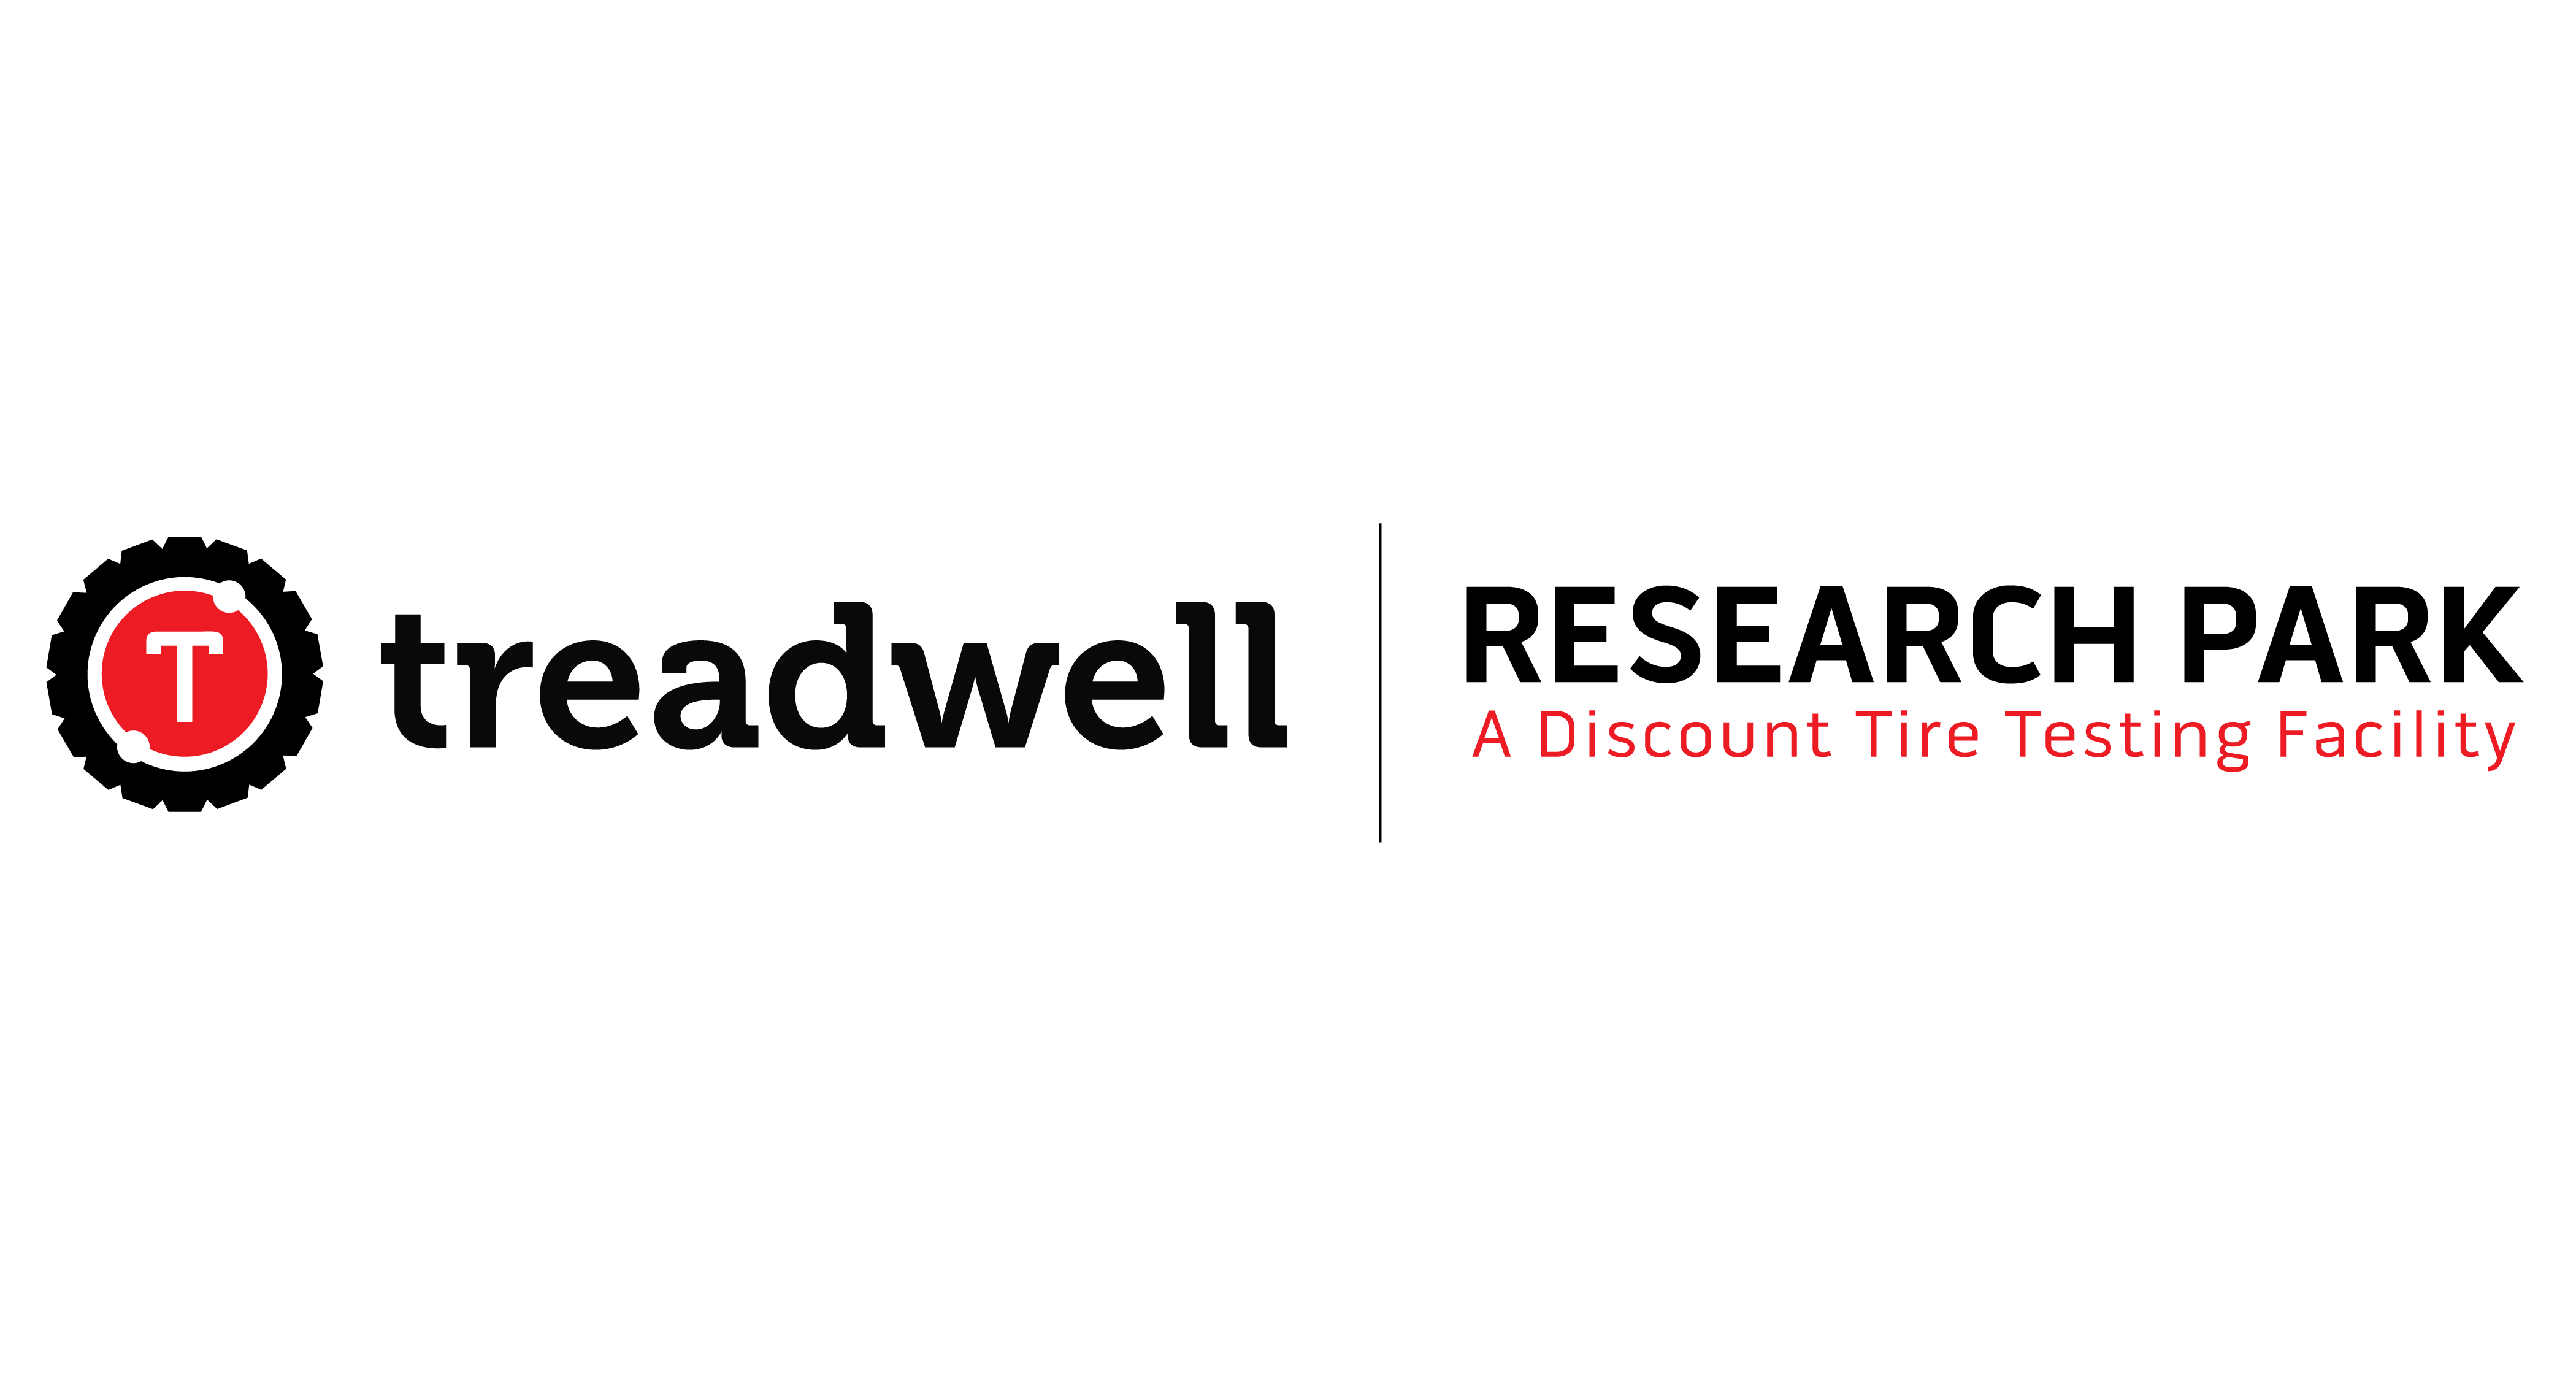 Treadwell Research Park